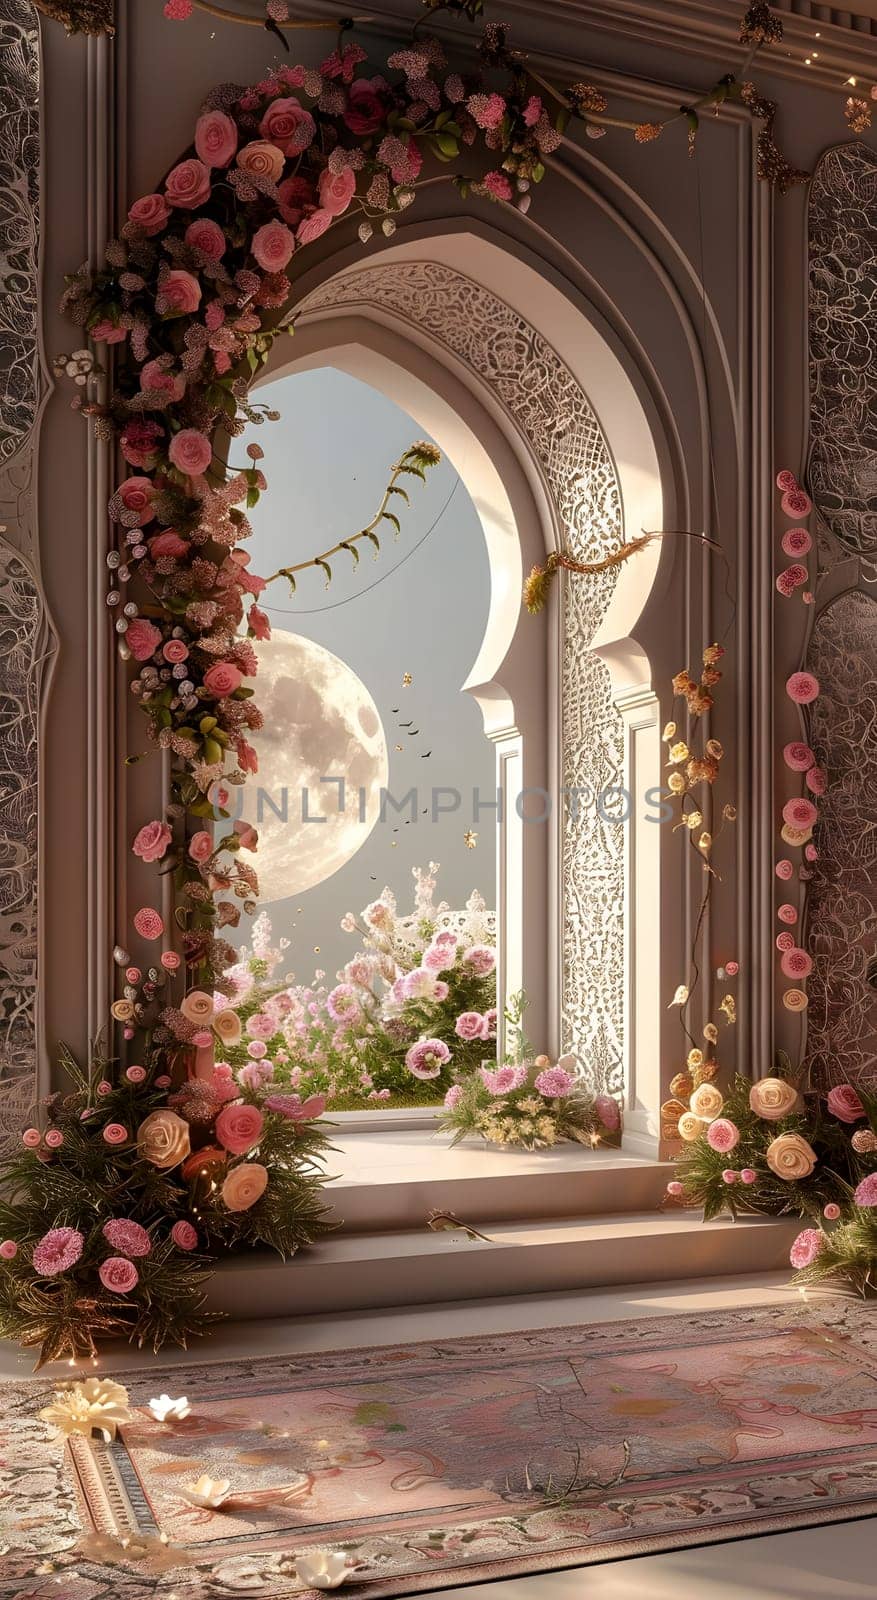 The room features a window framed by blooming flowers, overlooking a full moon. The buildings facade, adorned with brickwork, adds to the symmetry and artistry of the scene